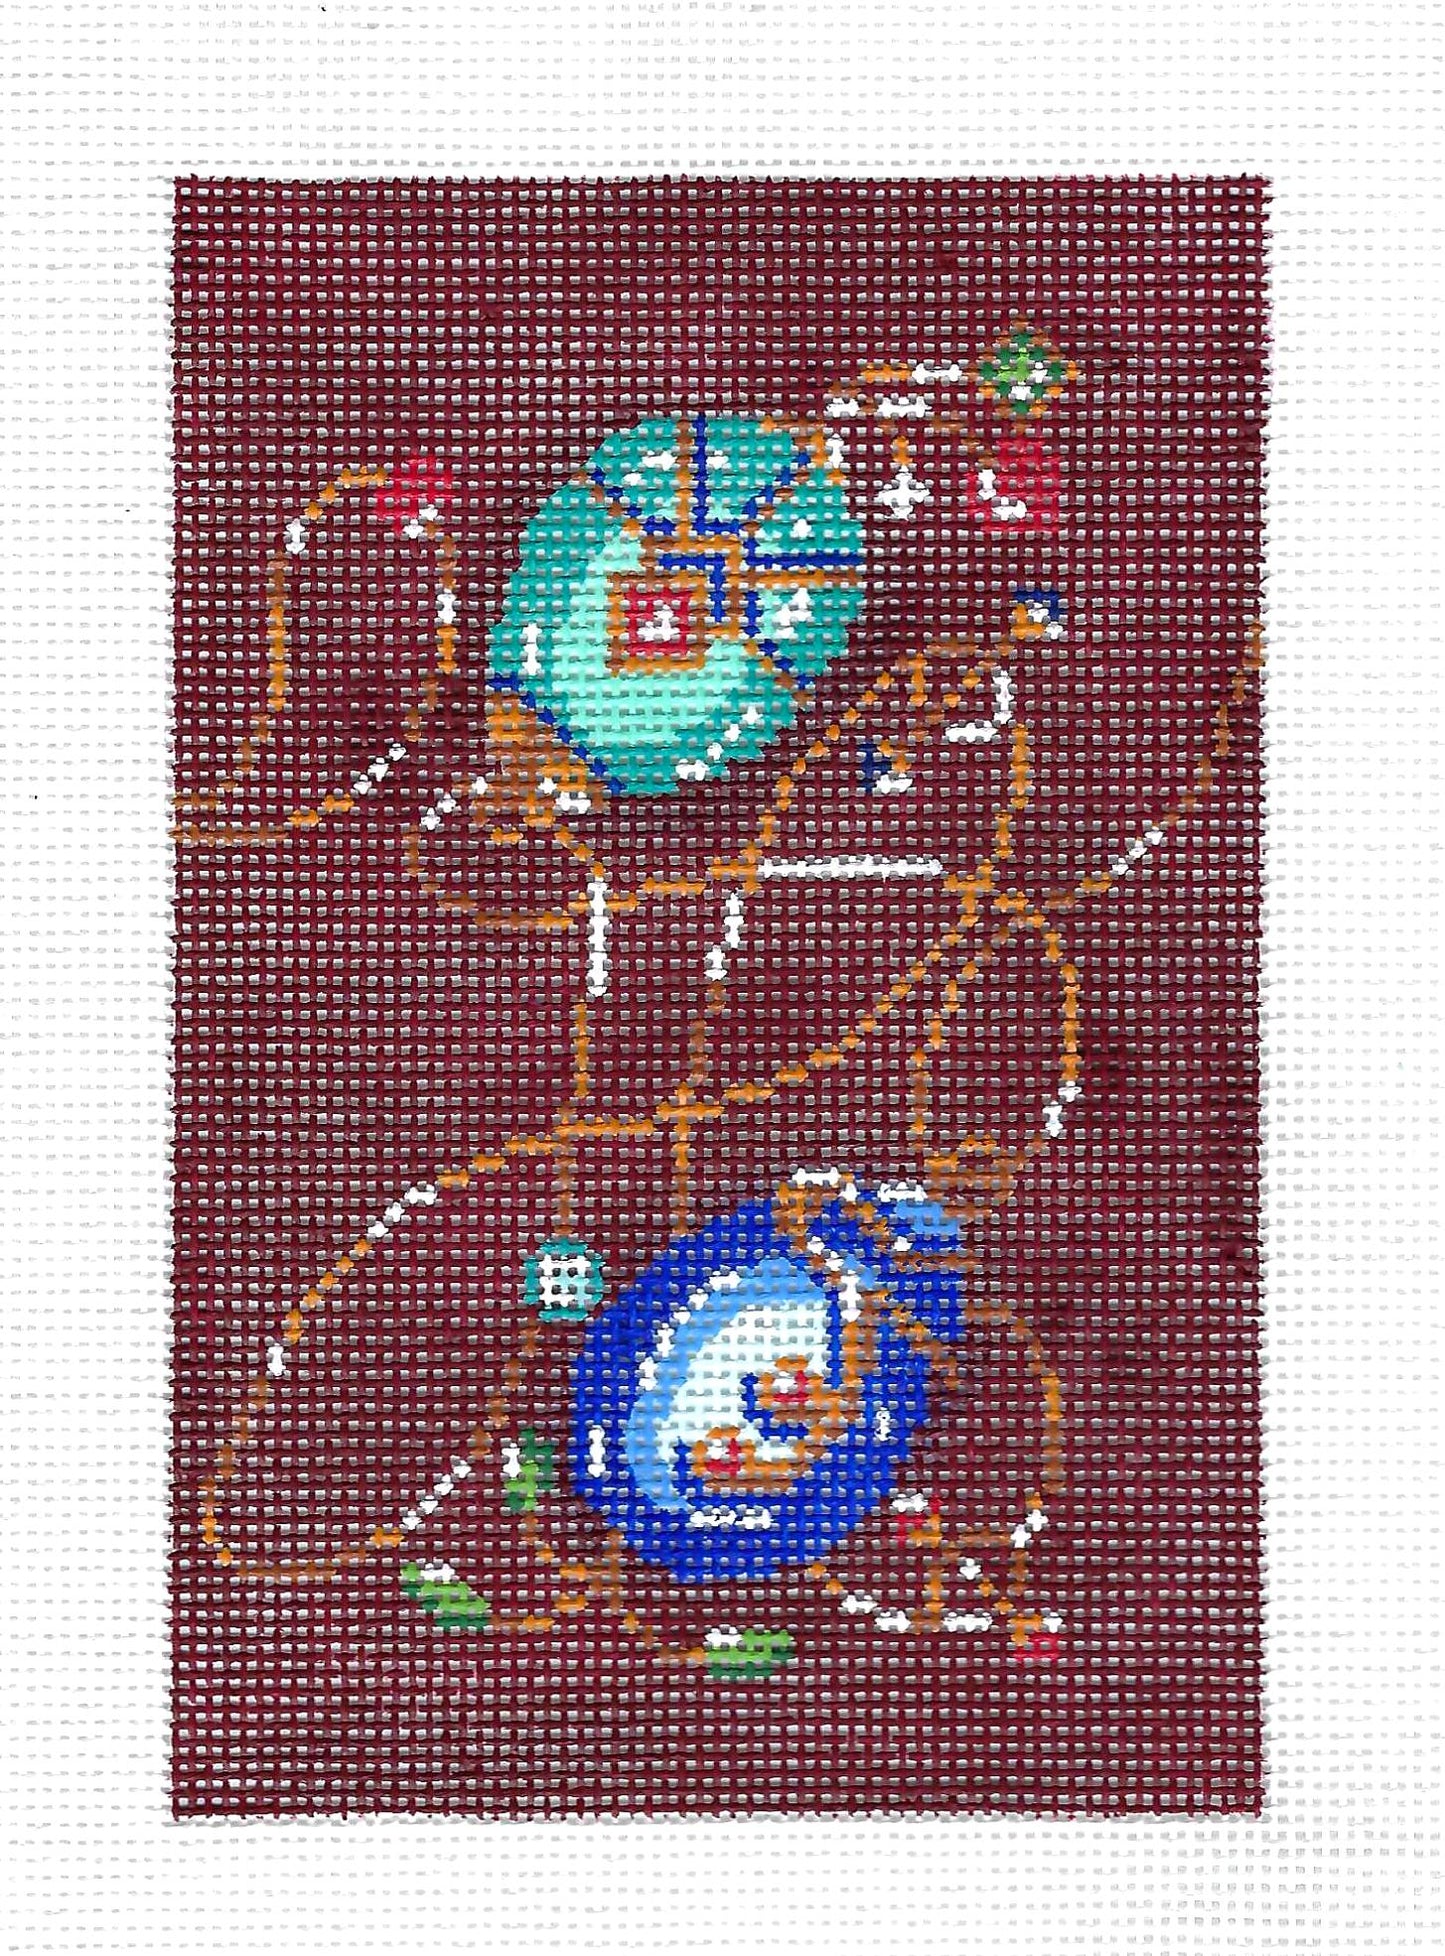 Insert ~ Two Jeweled FABERGE EGGS with GOLD RIBBON handpainted Needlepoint Canvas BC size Insert by LEE